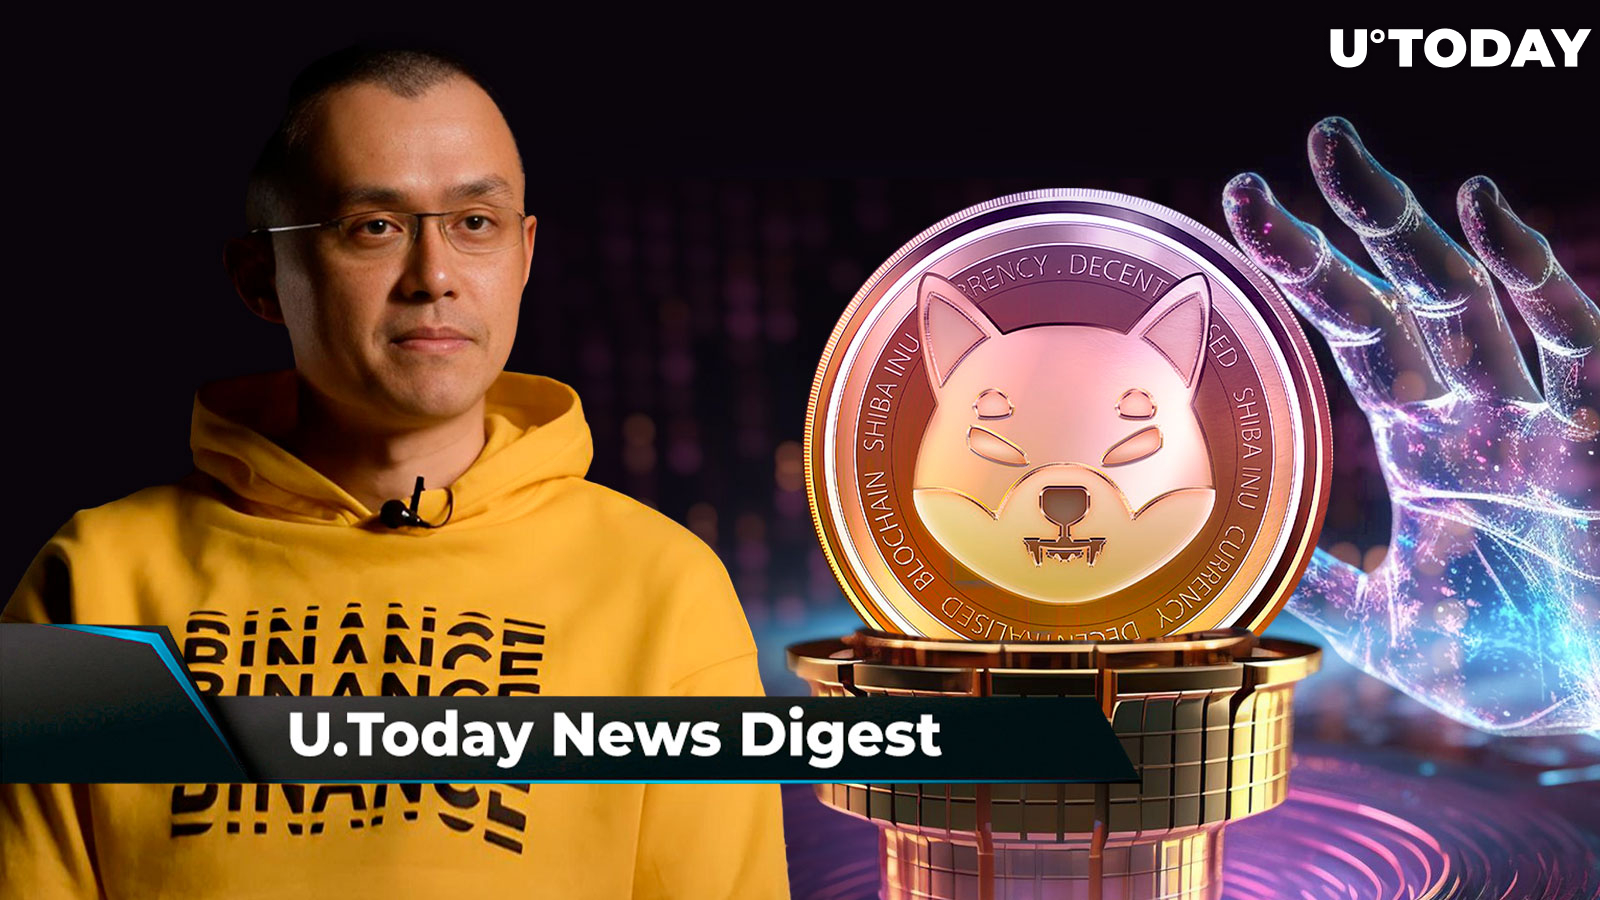 Former Binance CEO CZ Teases New Project, SHIB Team Member Shares Update on SHIB Metaverse, Solana Flips Binance Coin: Crypto News Digest by U.Today